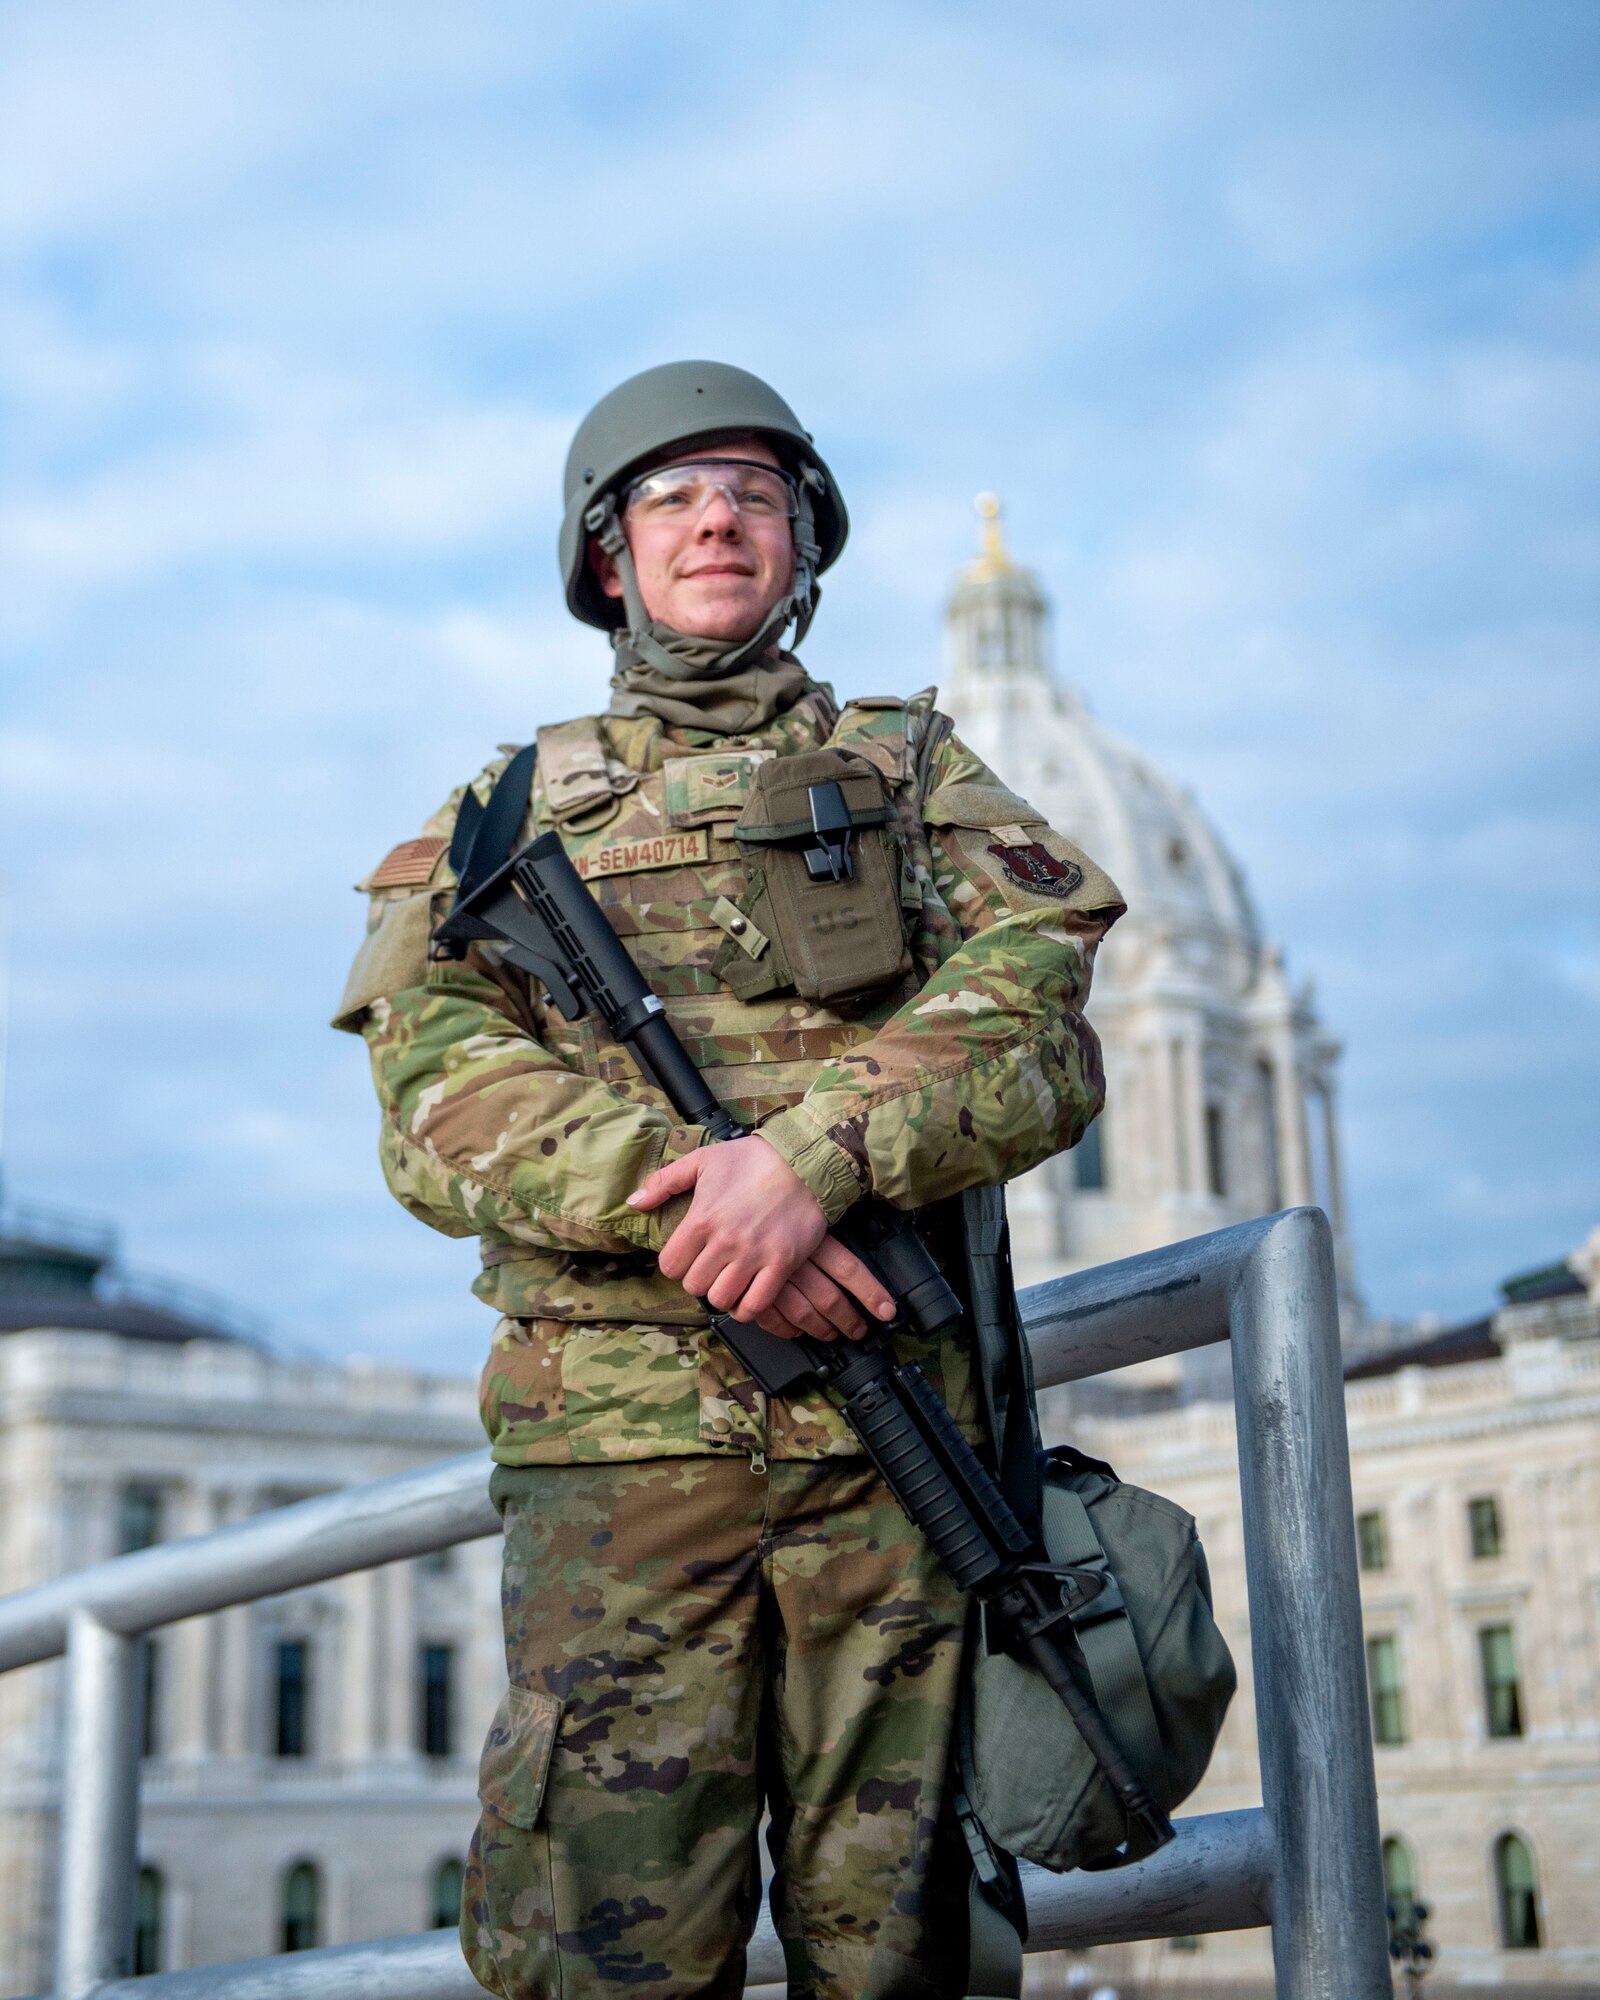 U.S. Air Force Airmen, Airman 1st Class Graham Seminari from the 148th Fighter Wing supports security missions during Operation Safety Net in St. Paul, Minn., Apr. 20, 2021.